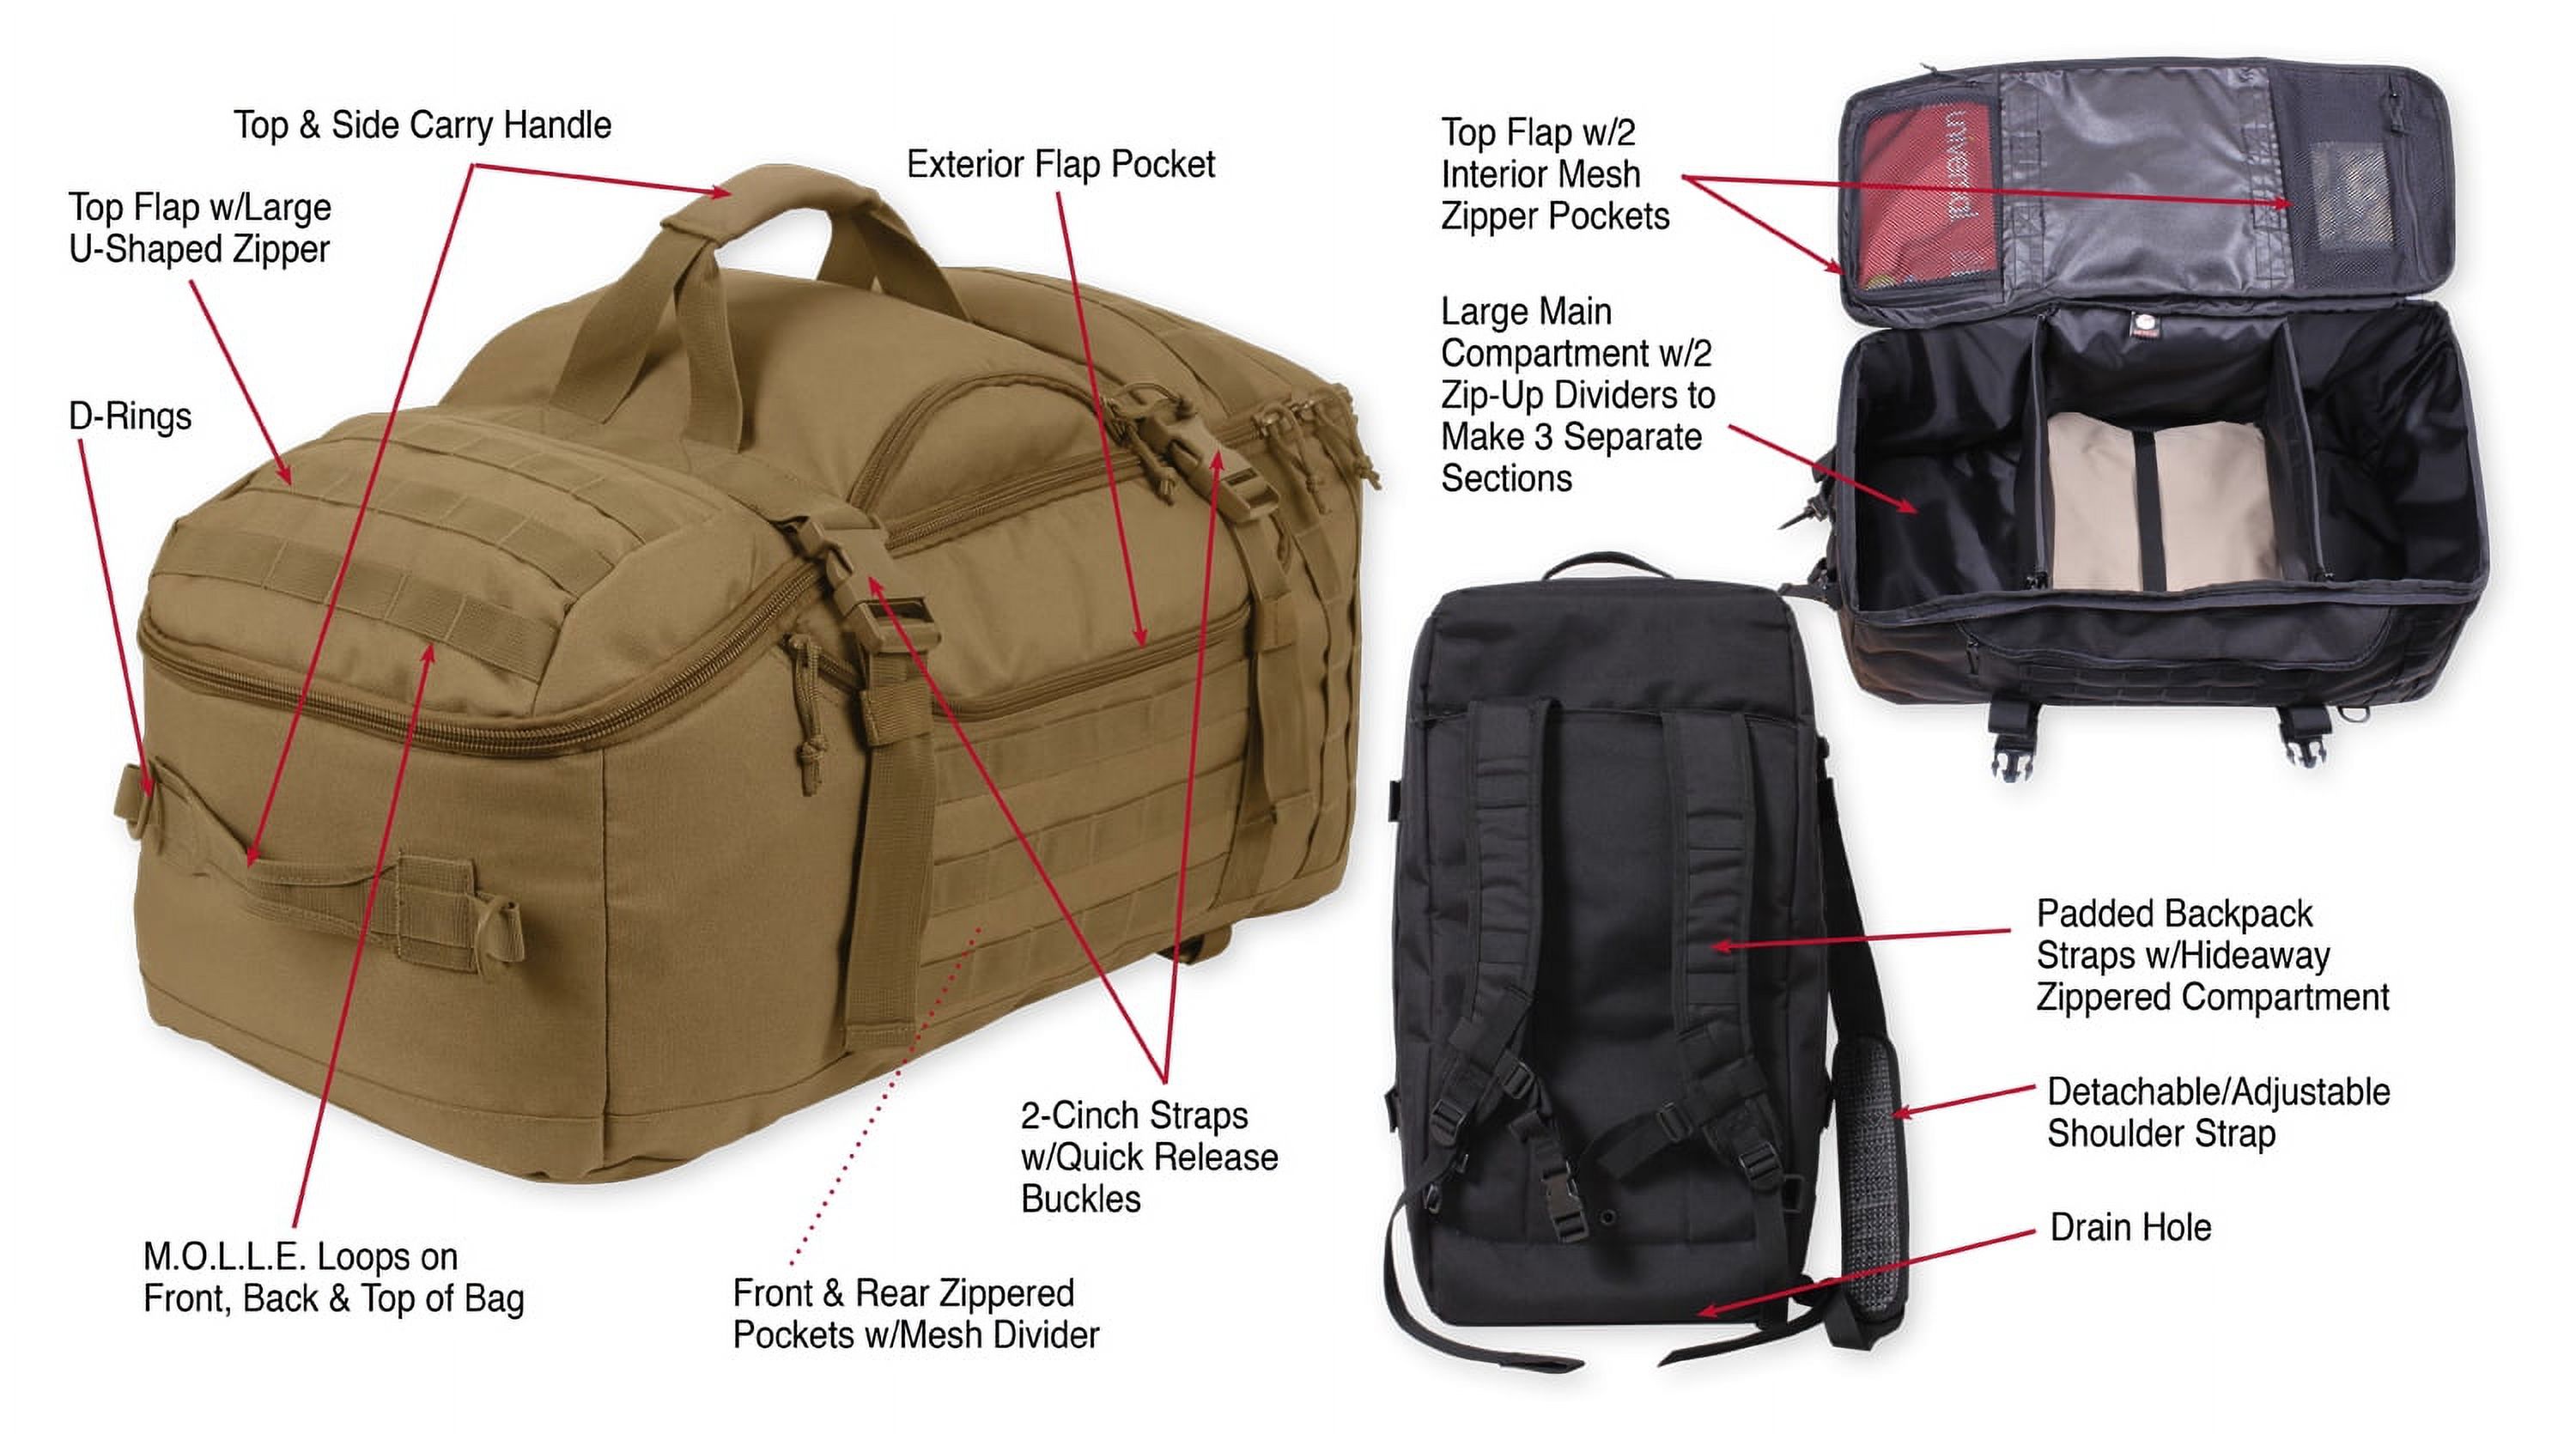 Rothco 3-In-1 Convertible Mission Bag - image 1 of 8